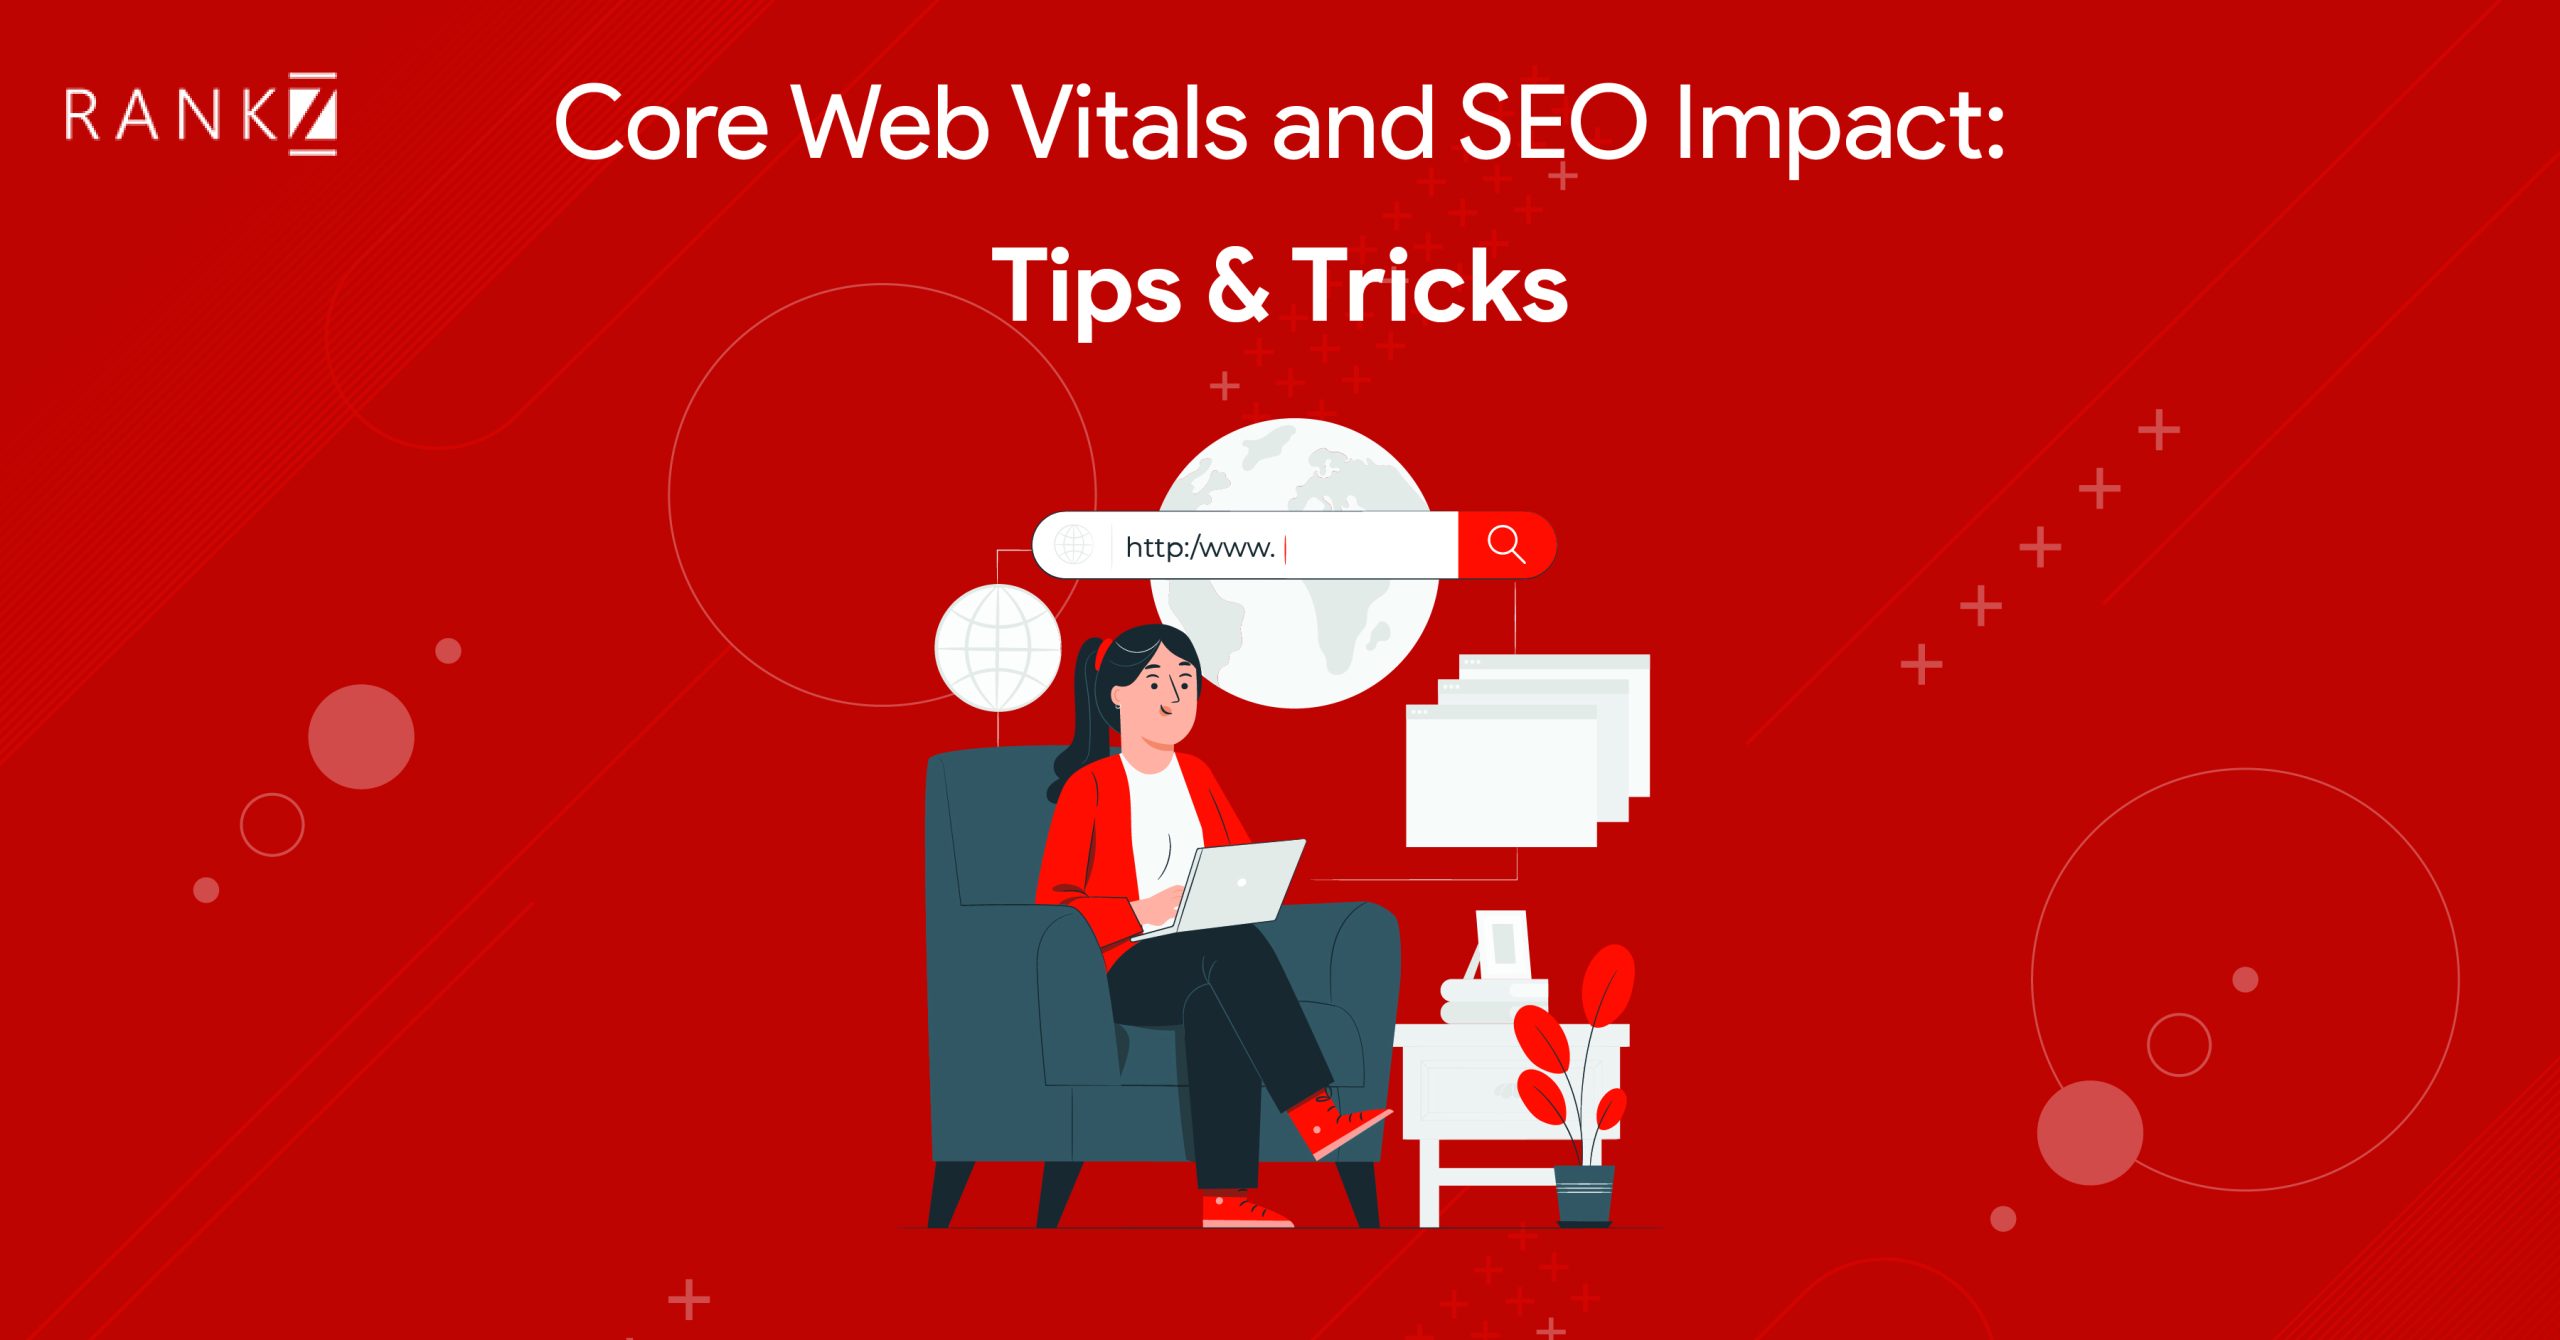 How Core Web Vitals and SEO Impact Your Website’s Success